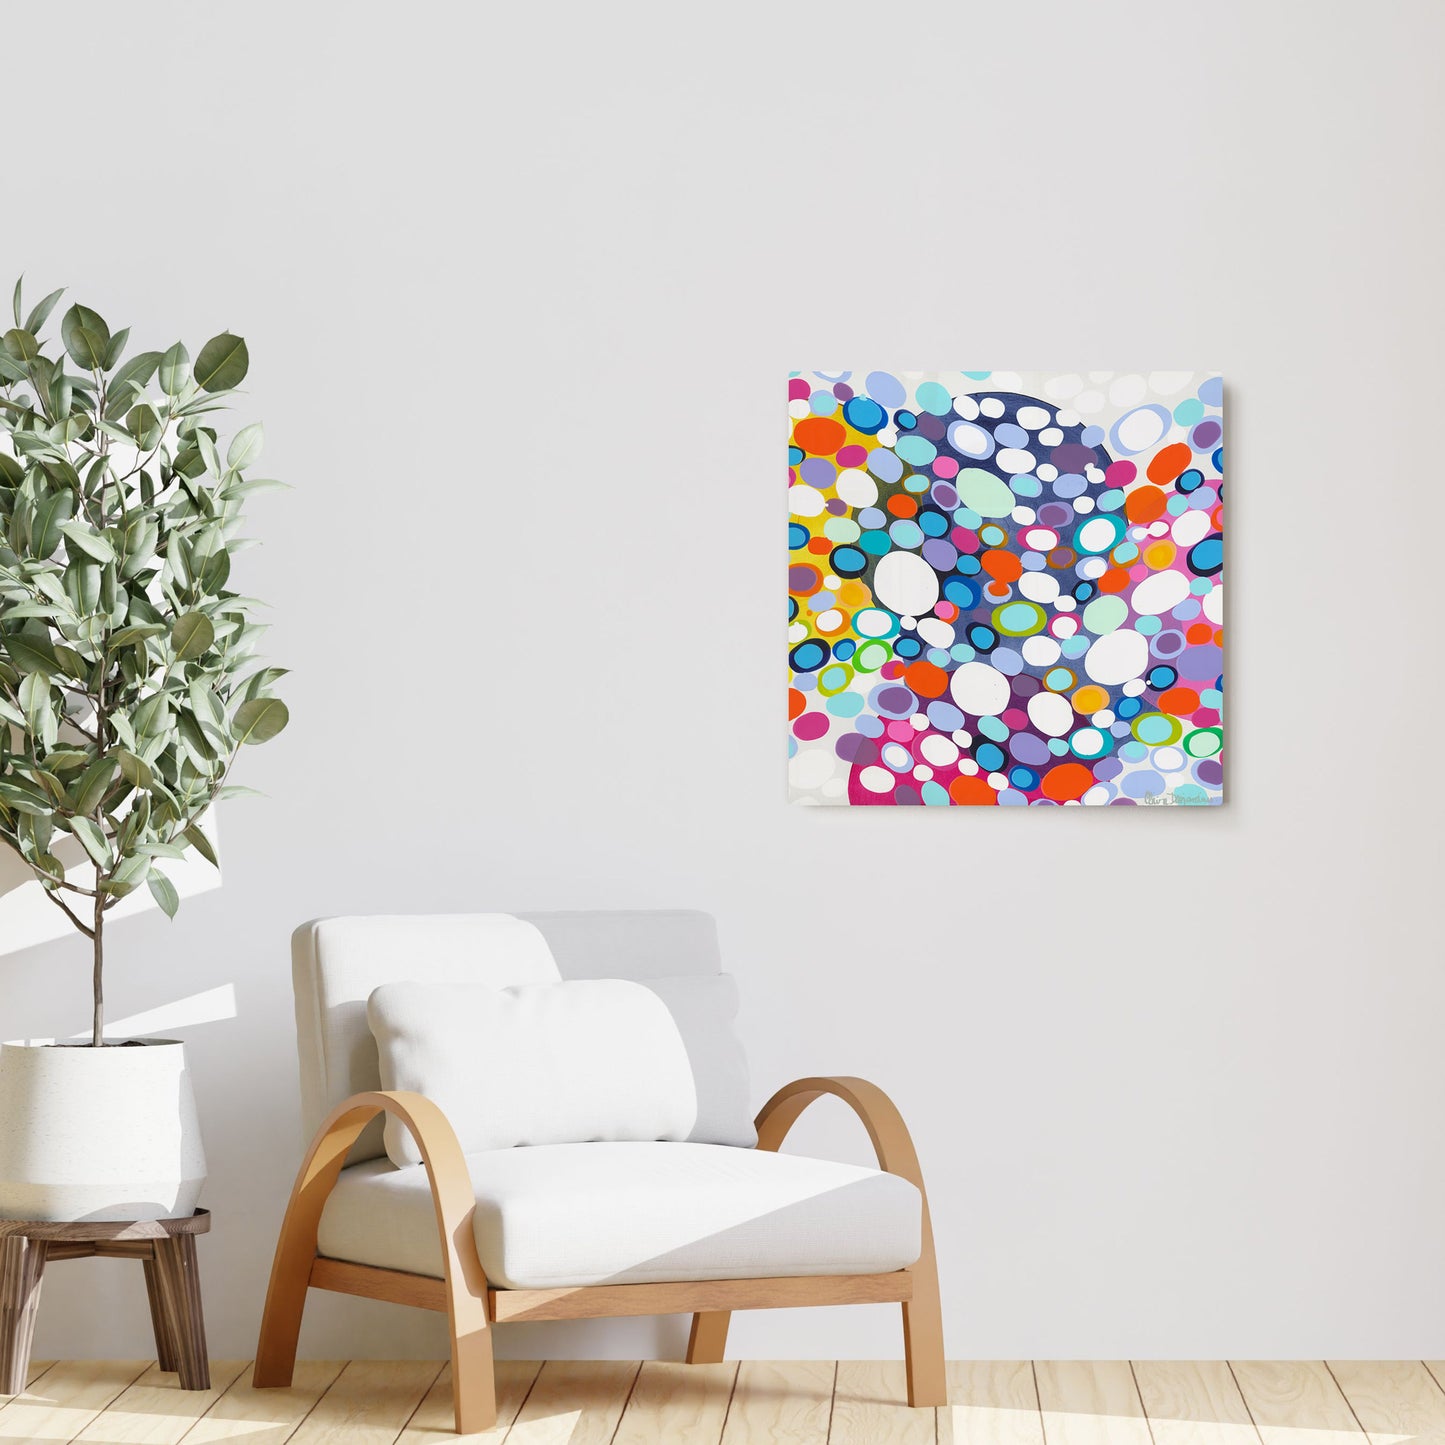 Claire Desjardins' Delirium painting reproduced on HD metal print and displayed on wall